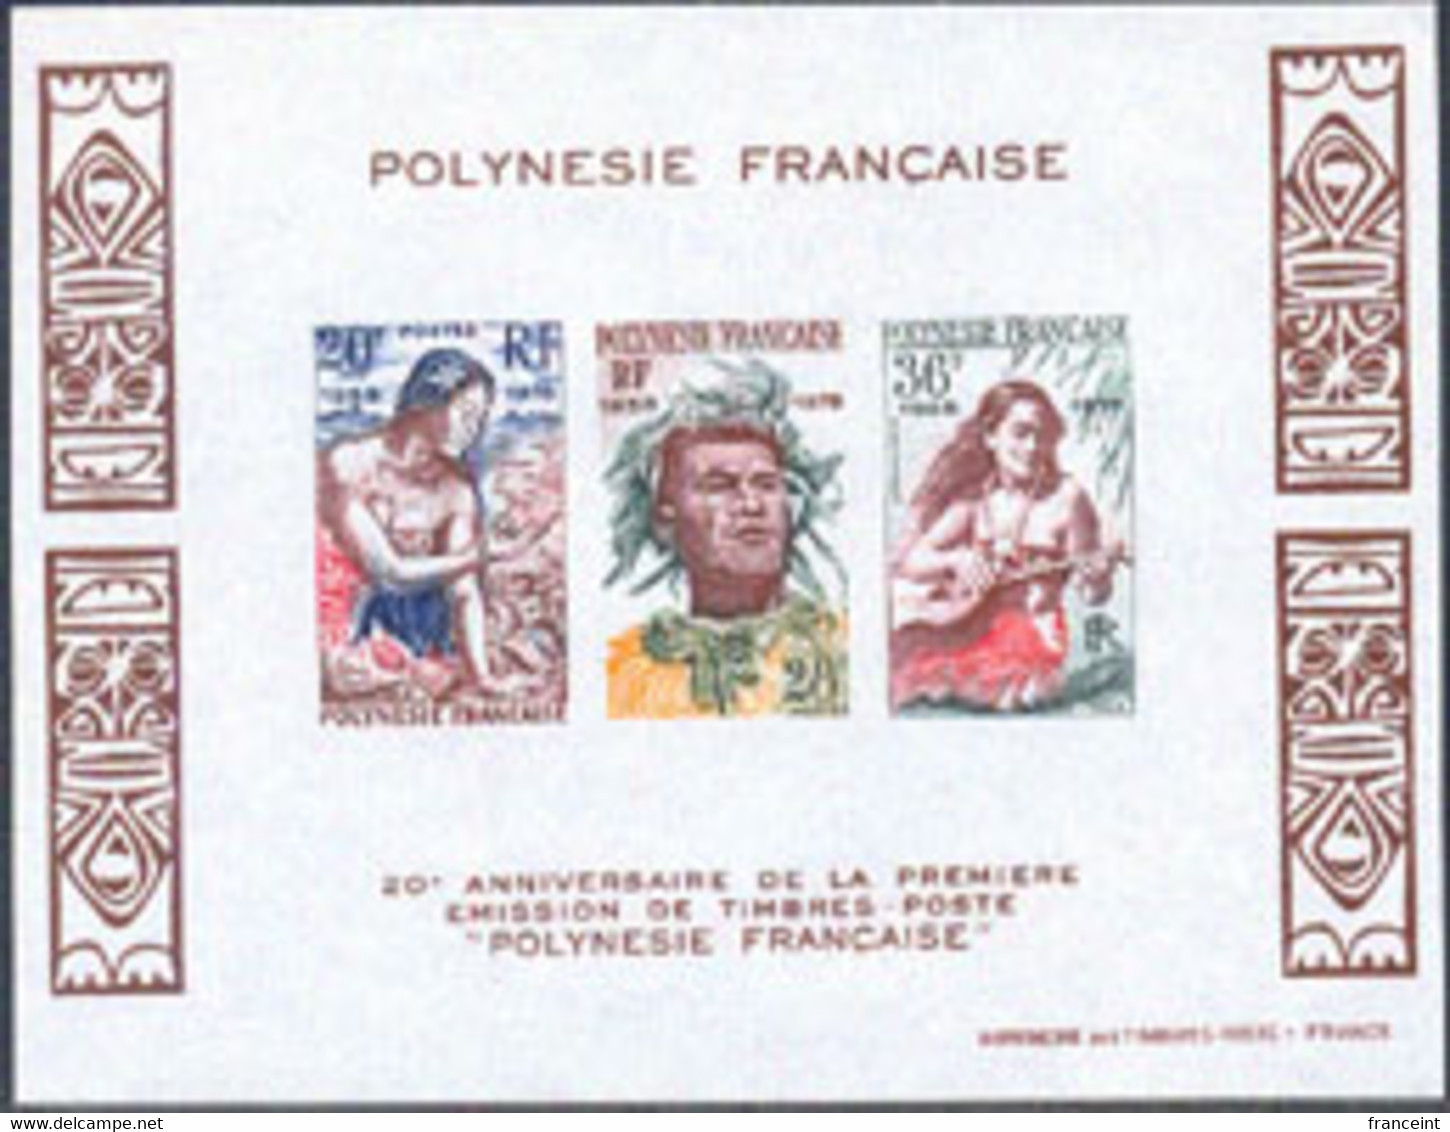 FRENCH POLYNESIA (1978) Girl With Shells Main In Headdress. Girl Playing Guitar. Imperforate M/S. Scott No 306a - Imperforates, Proofs & Errors